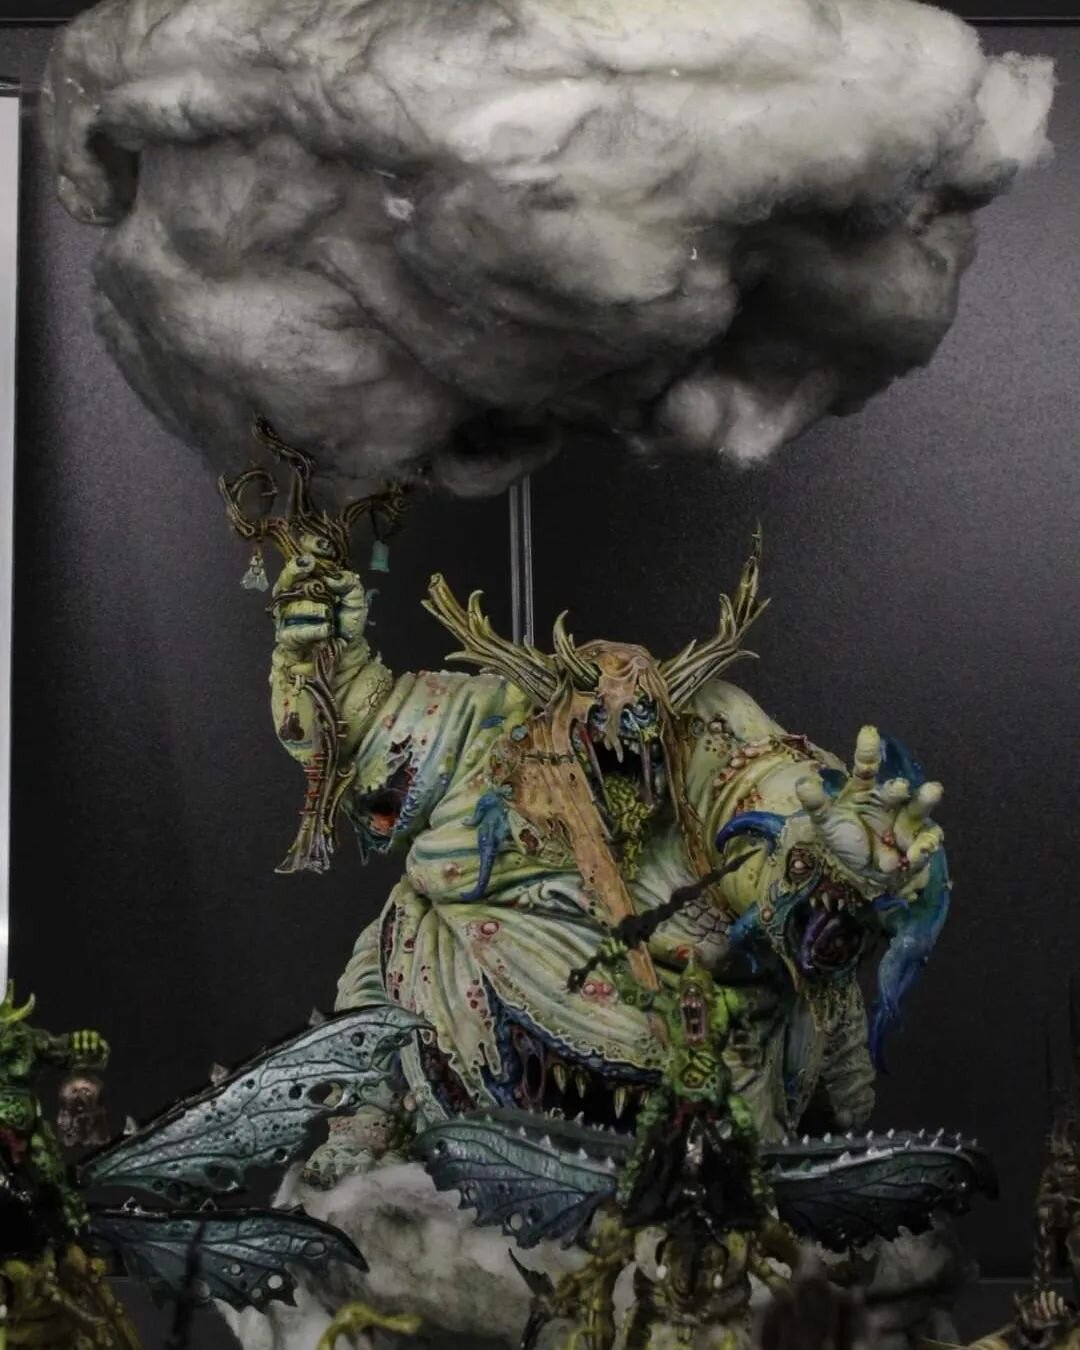 The GW staff got a lovely photo of Rotigus and his clouds. Wildly happy to have got bronze in the Throne Of Skulls doubles painting competition with everyone's favourite Droog @badusernametag